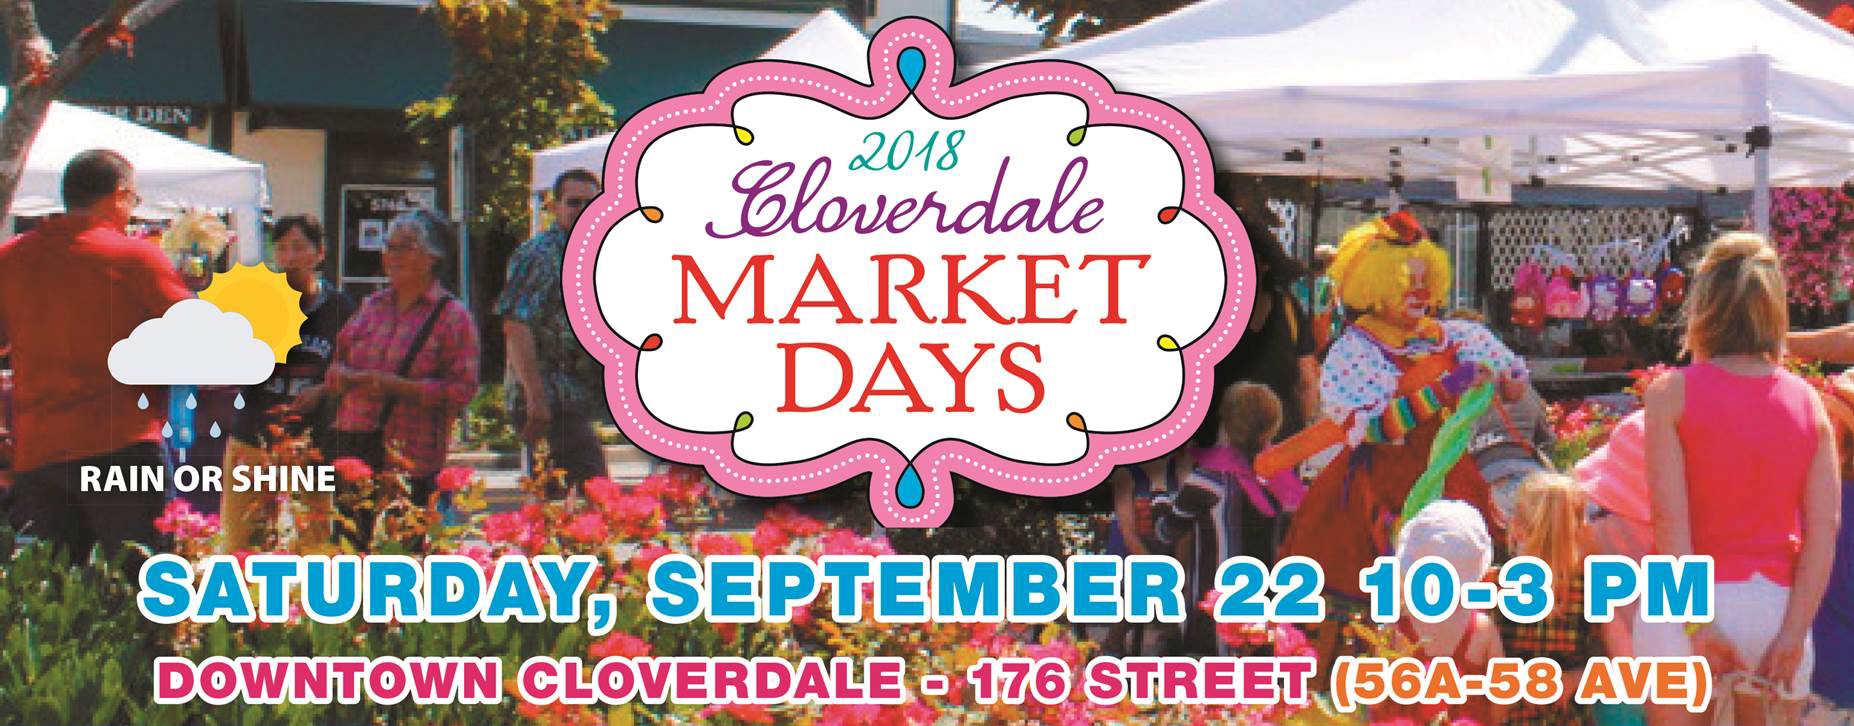 Come visit Cloverdale for Market Days on Saturday this weekend! - Malary's